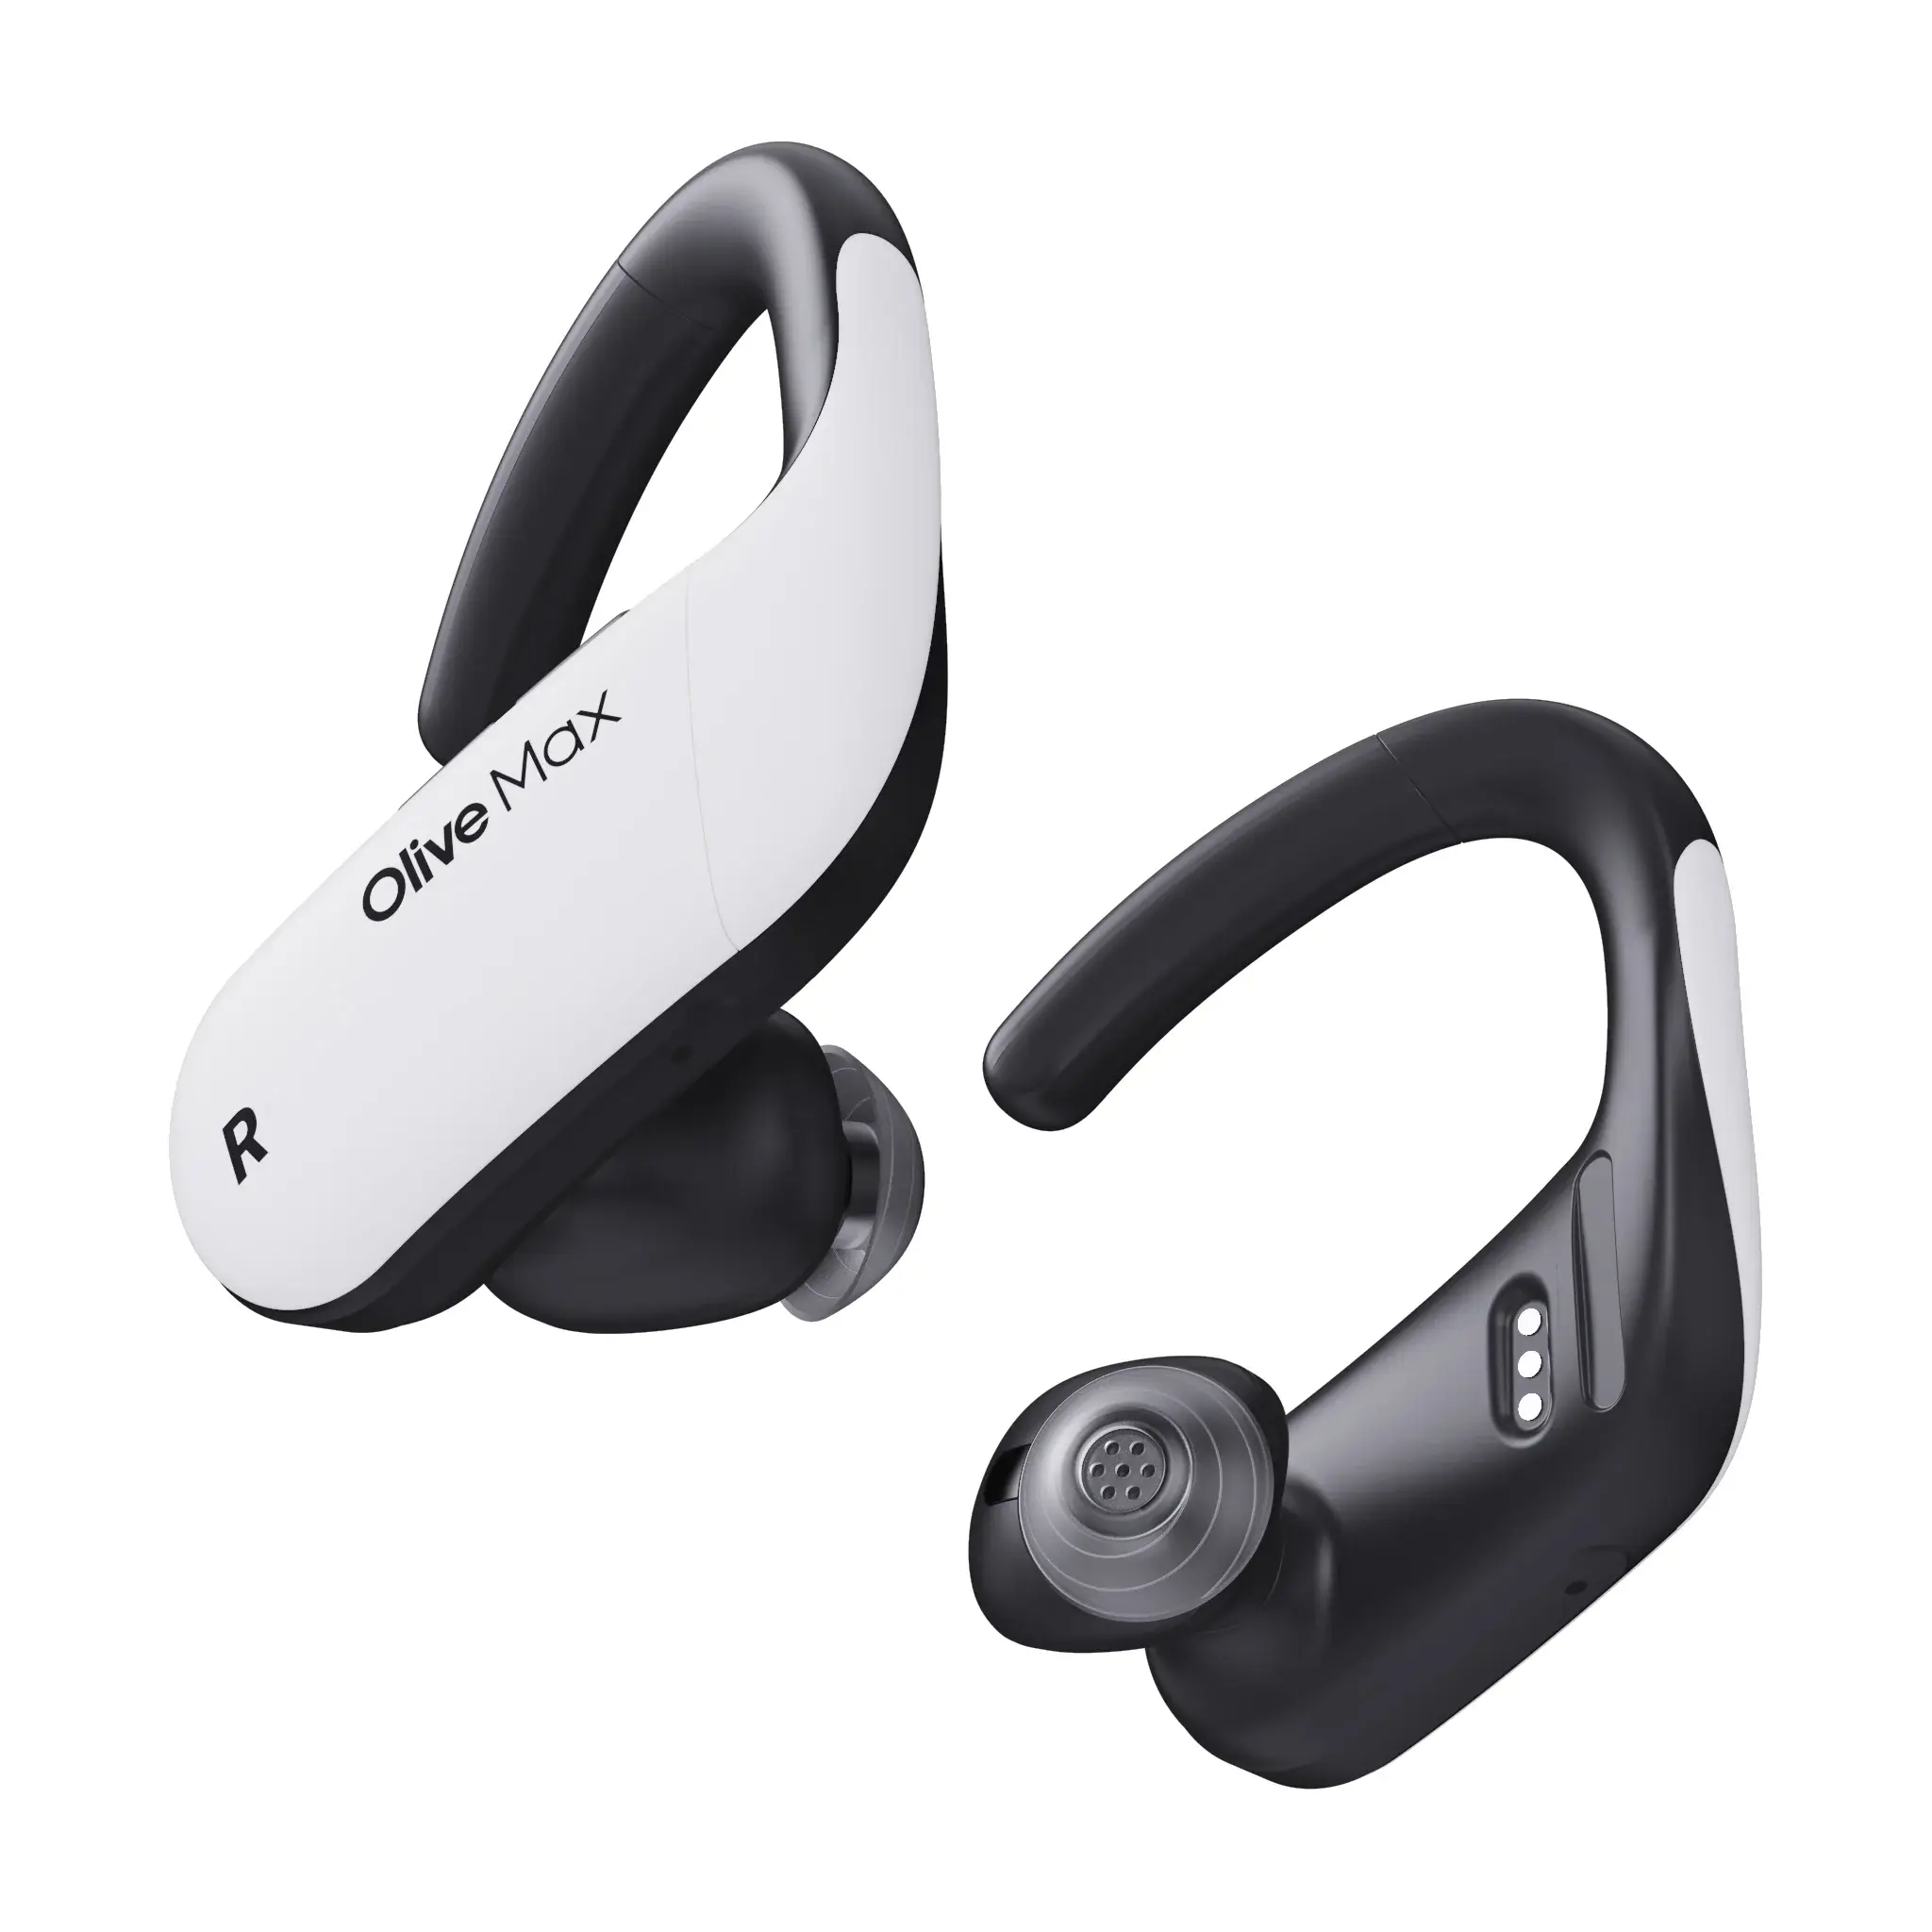 Olive Max by Olive Union bringing hearing aids in styled and functional way.